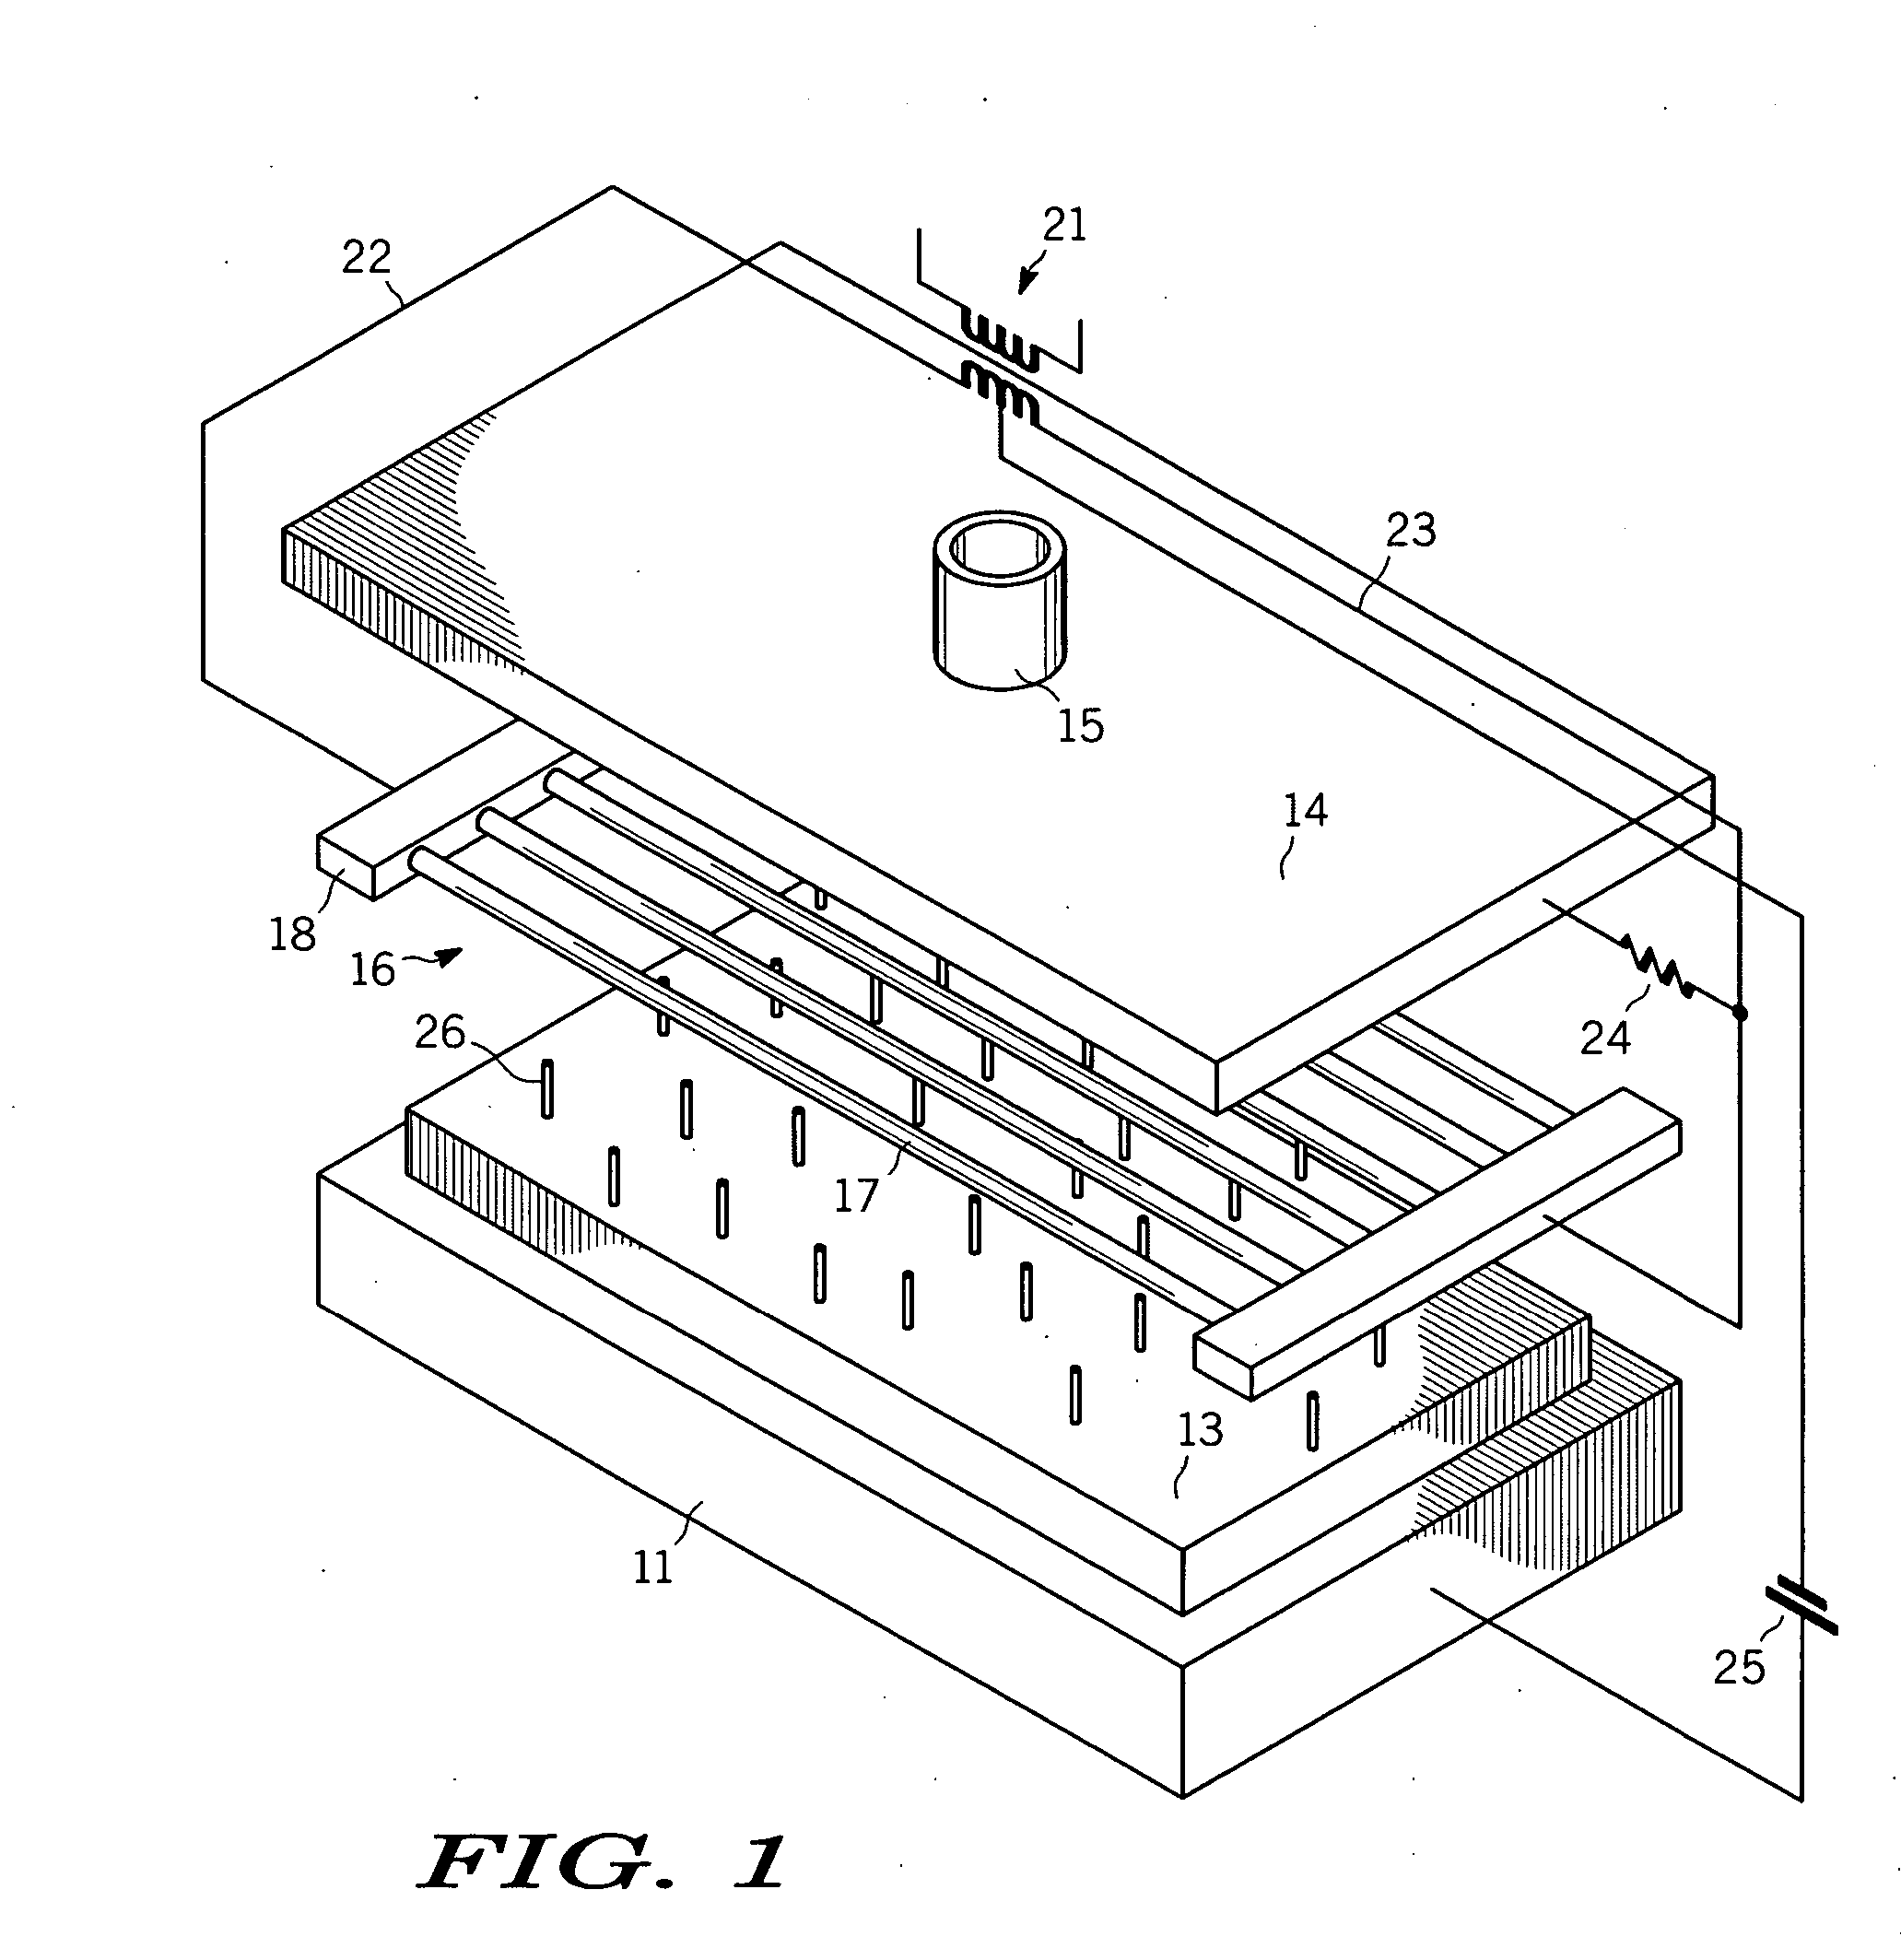 Apparatus and process for carbon nanotube growth